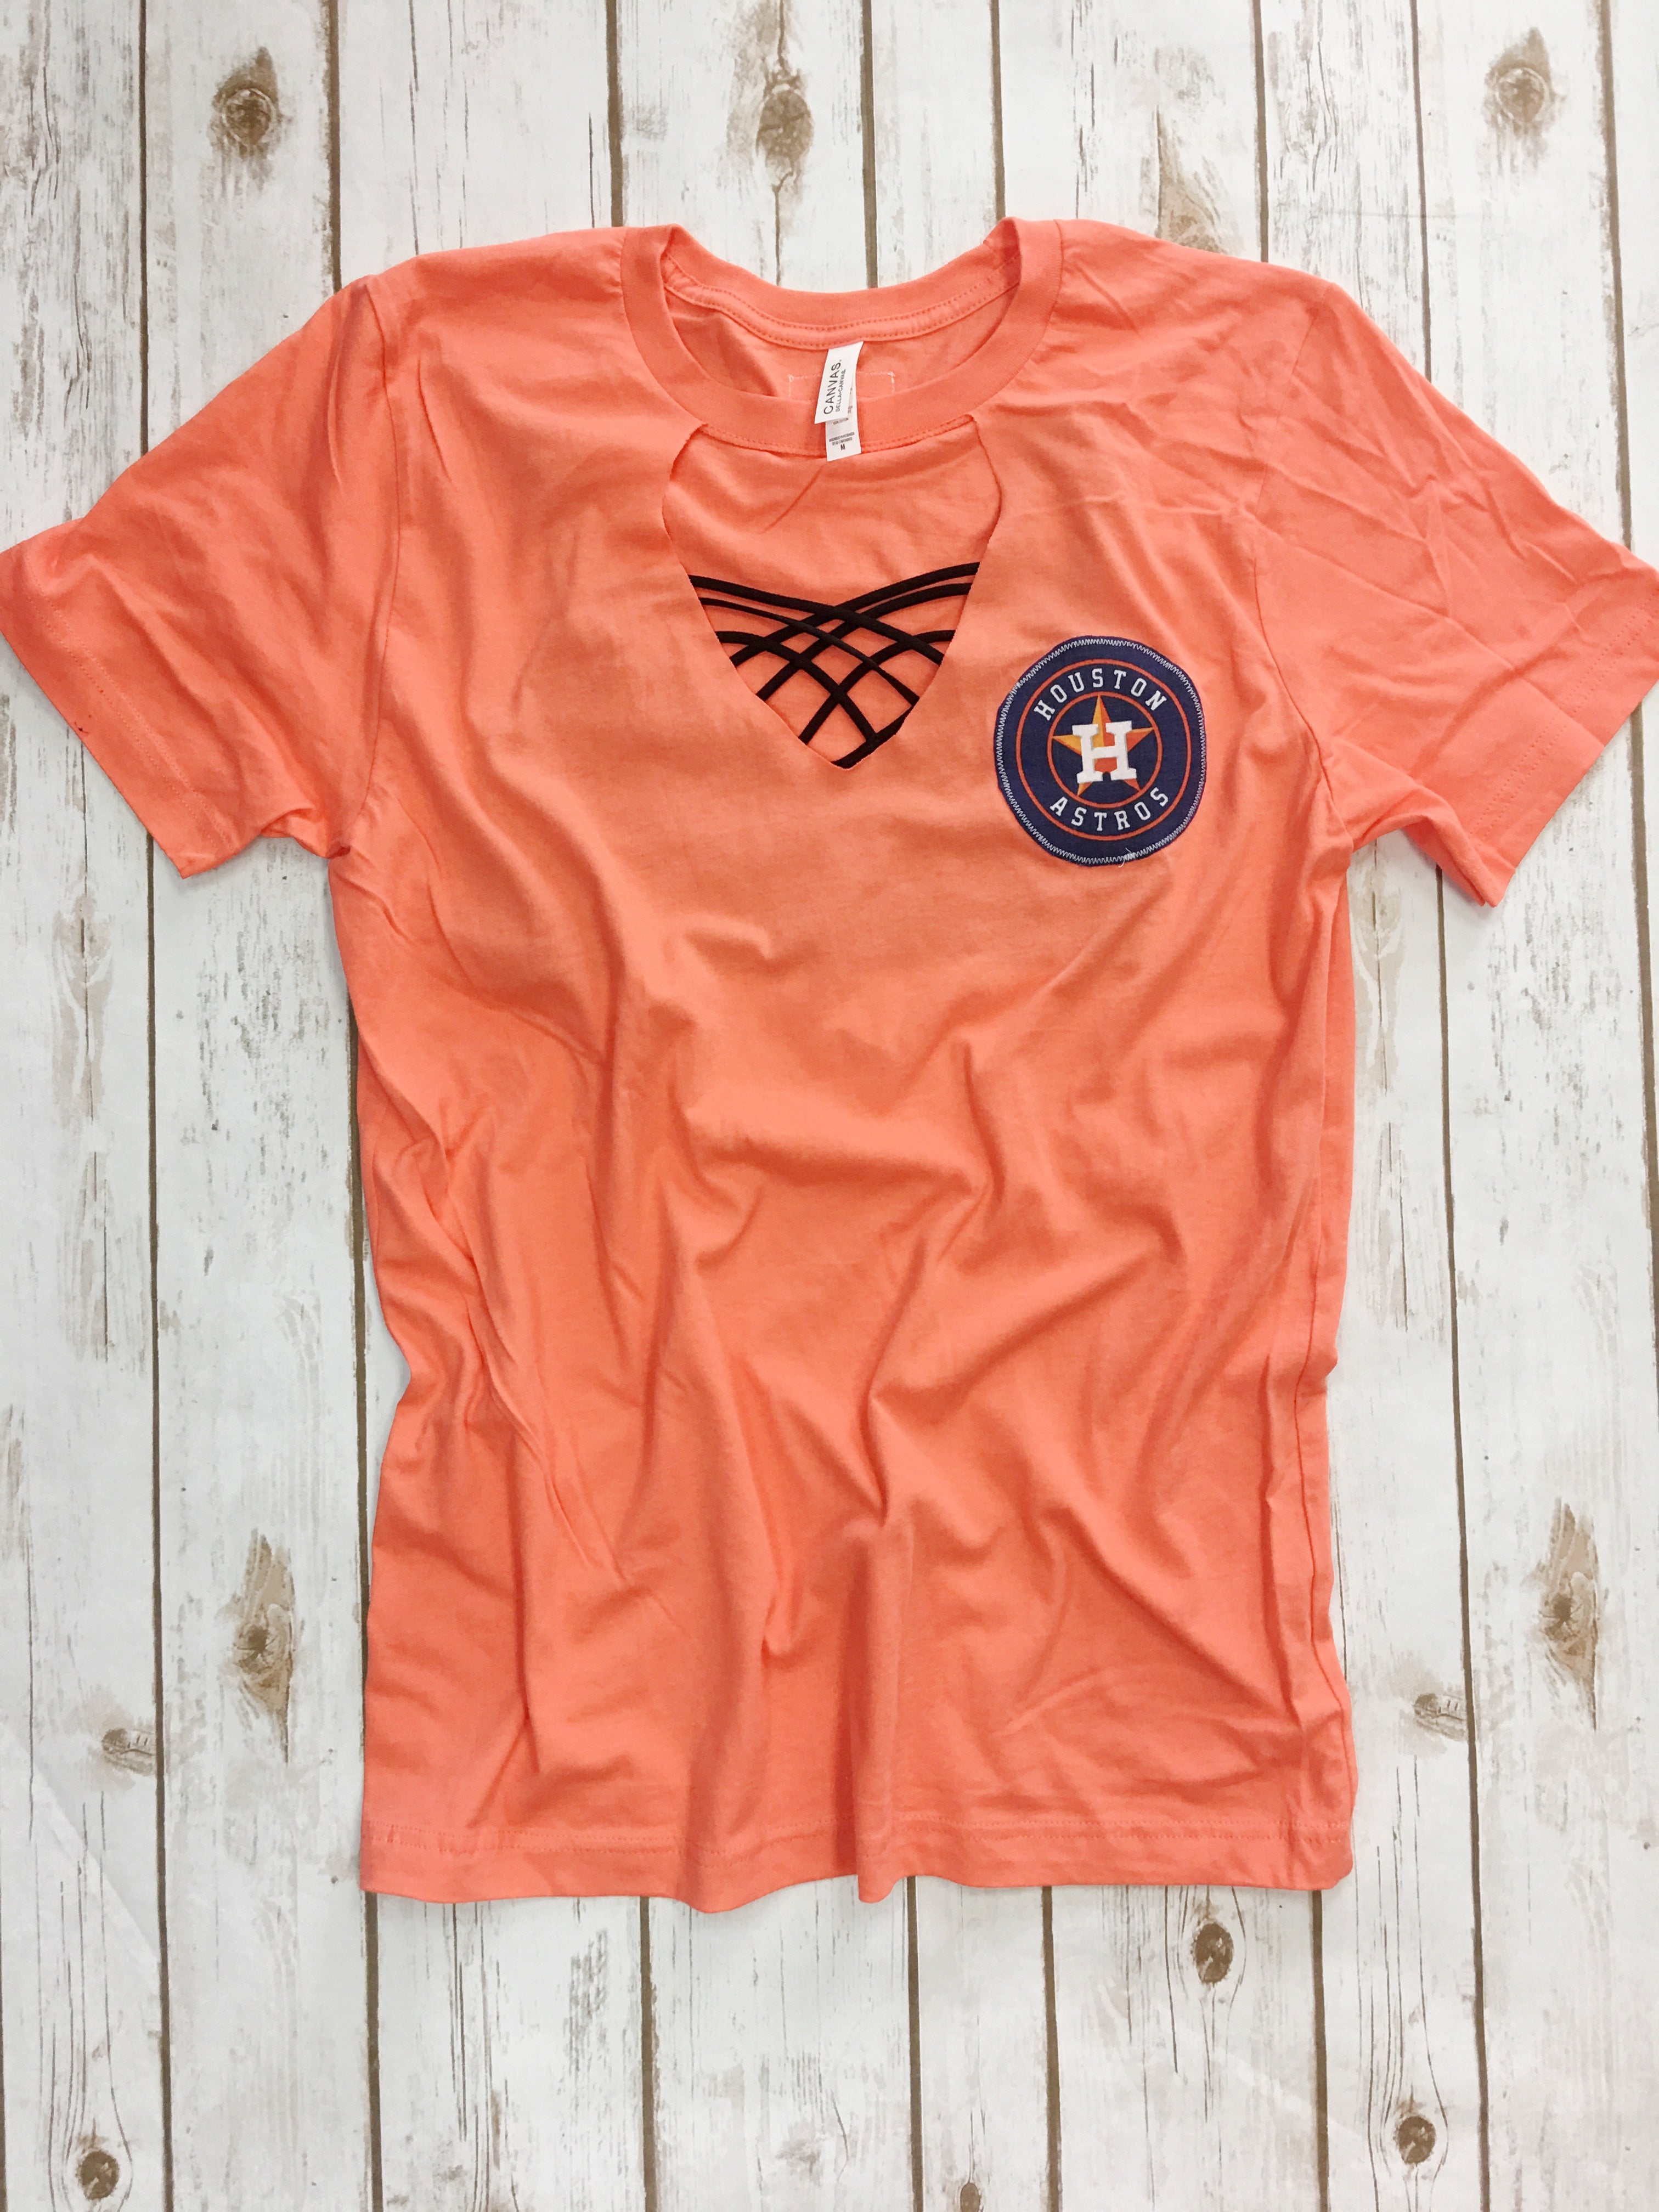 Last Chance Size 3XL | Go Astros Short Sleeve Tee in Orange with Keyhole - Giddy Up Glamour Boutique